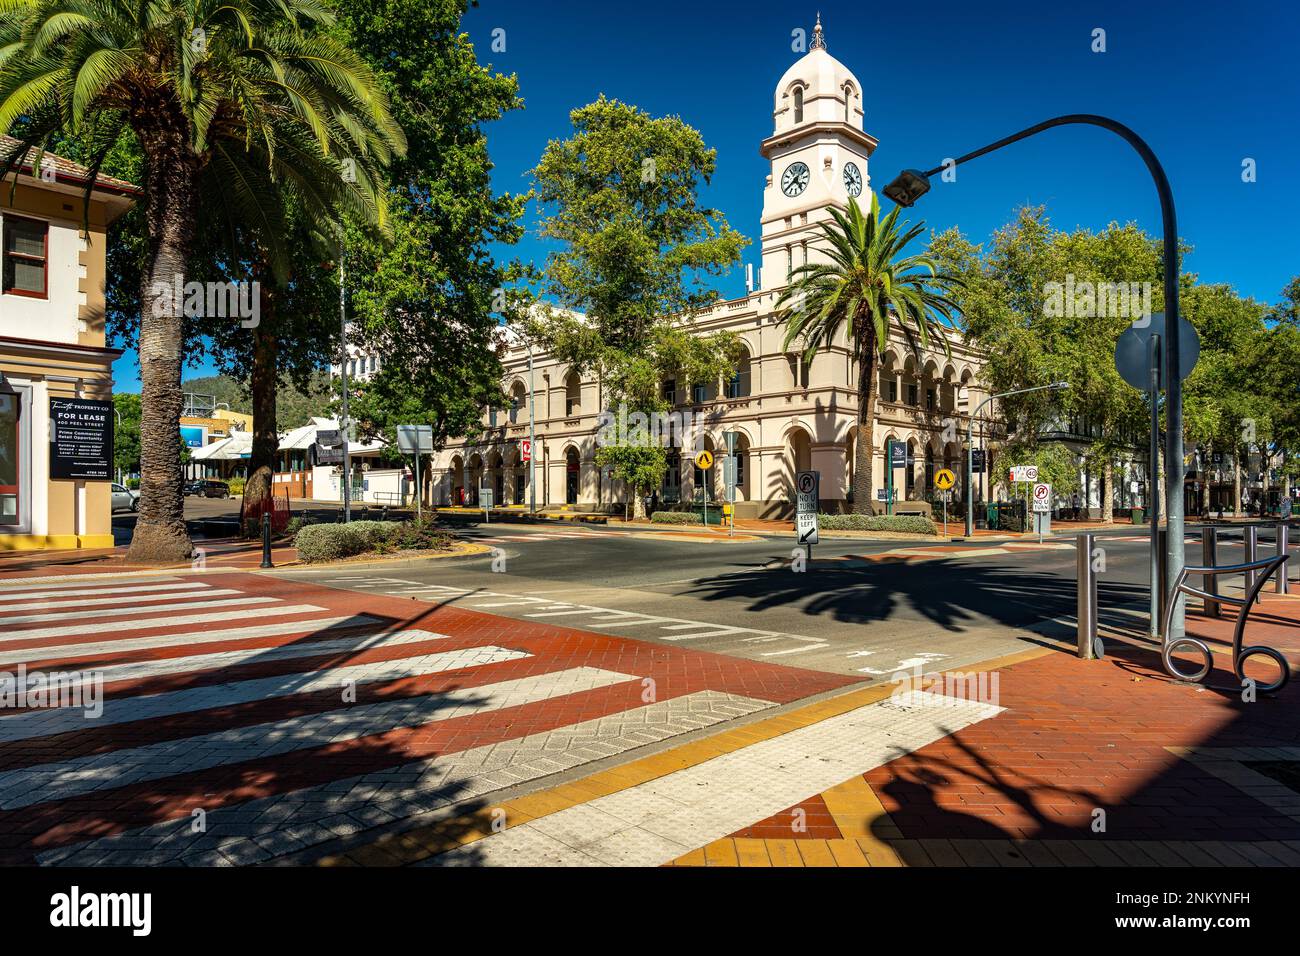 Tamworth, New South Wales, Australia - Historical post office building Stock Photo